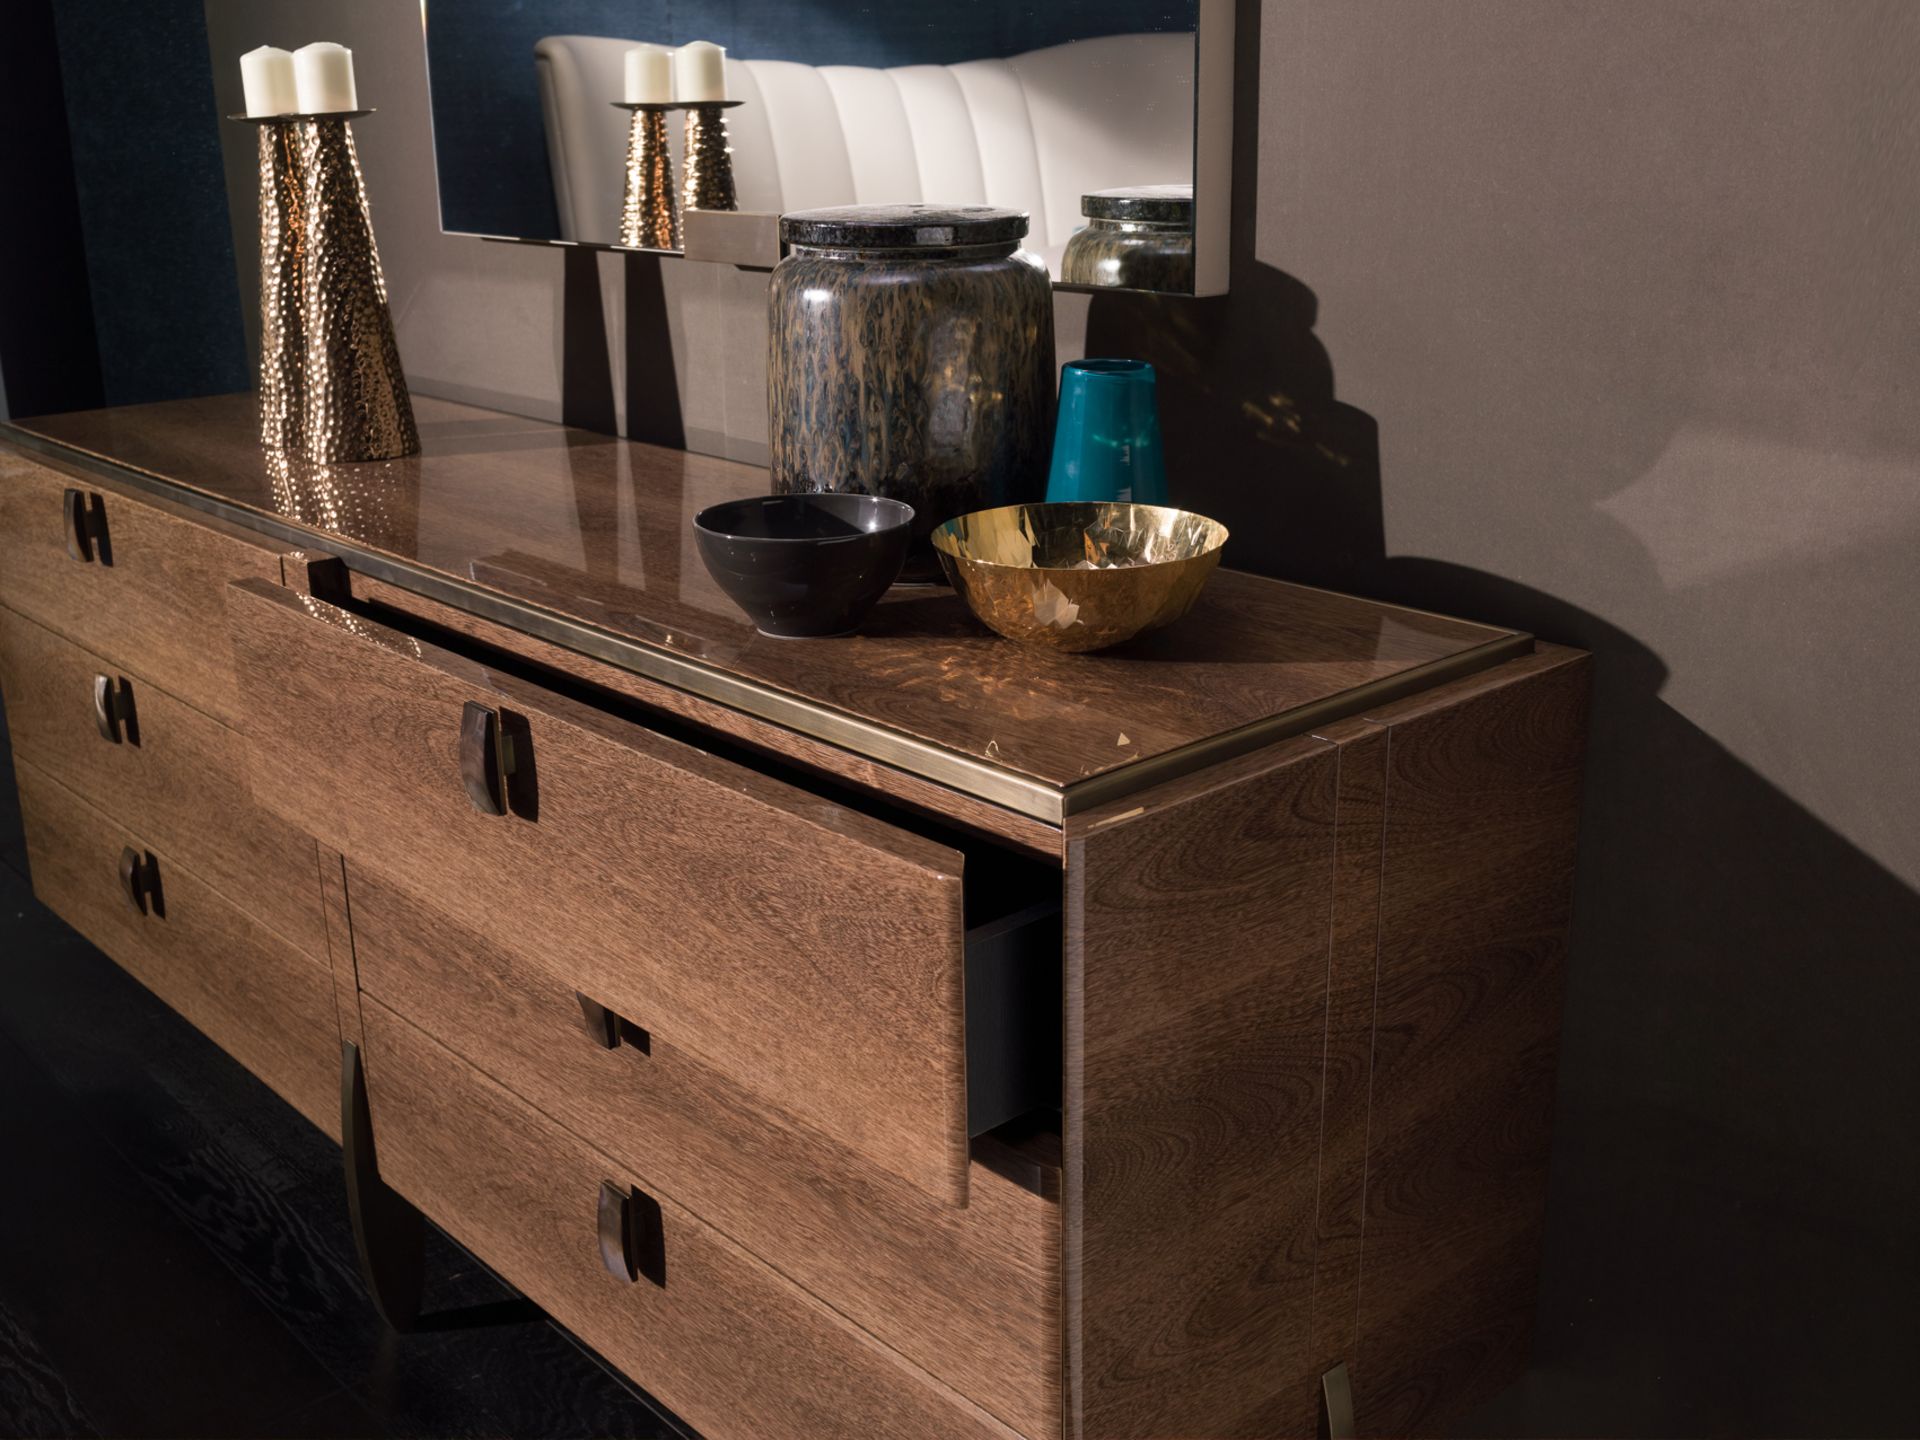 Fashion Affair Bedroom Cabinet by Telemaco for Malerba The Dresser has six drawers, is decorated - Image 7 of 15